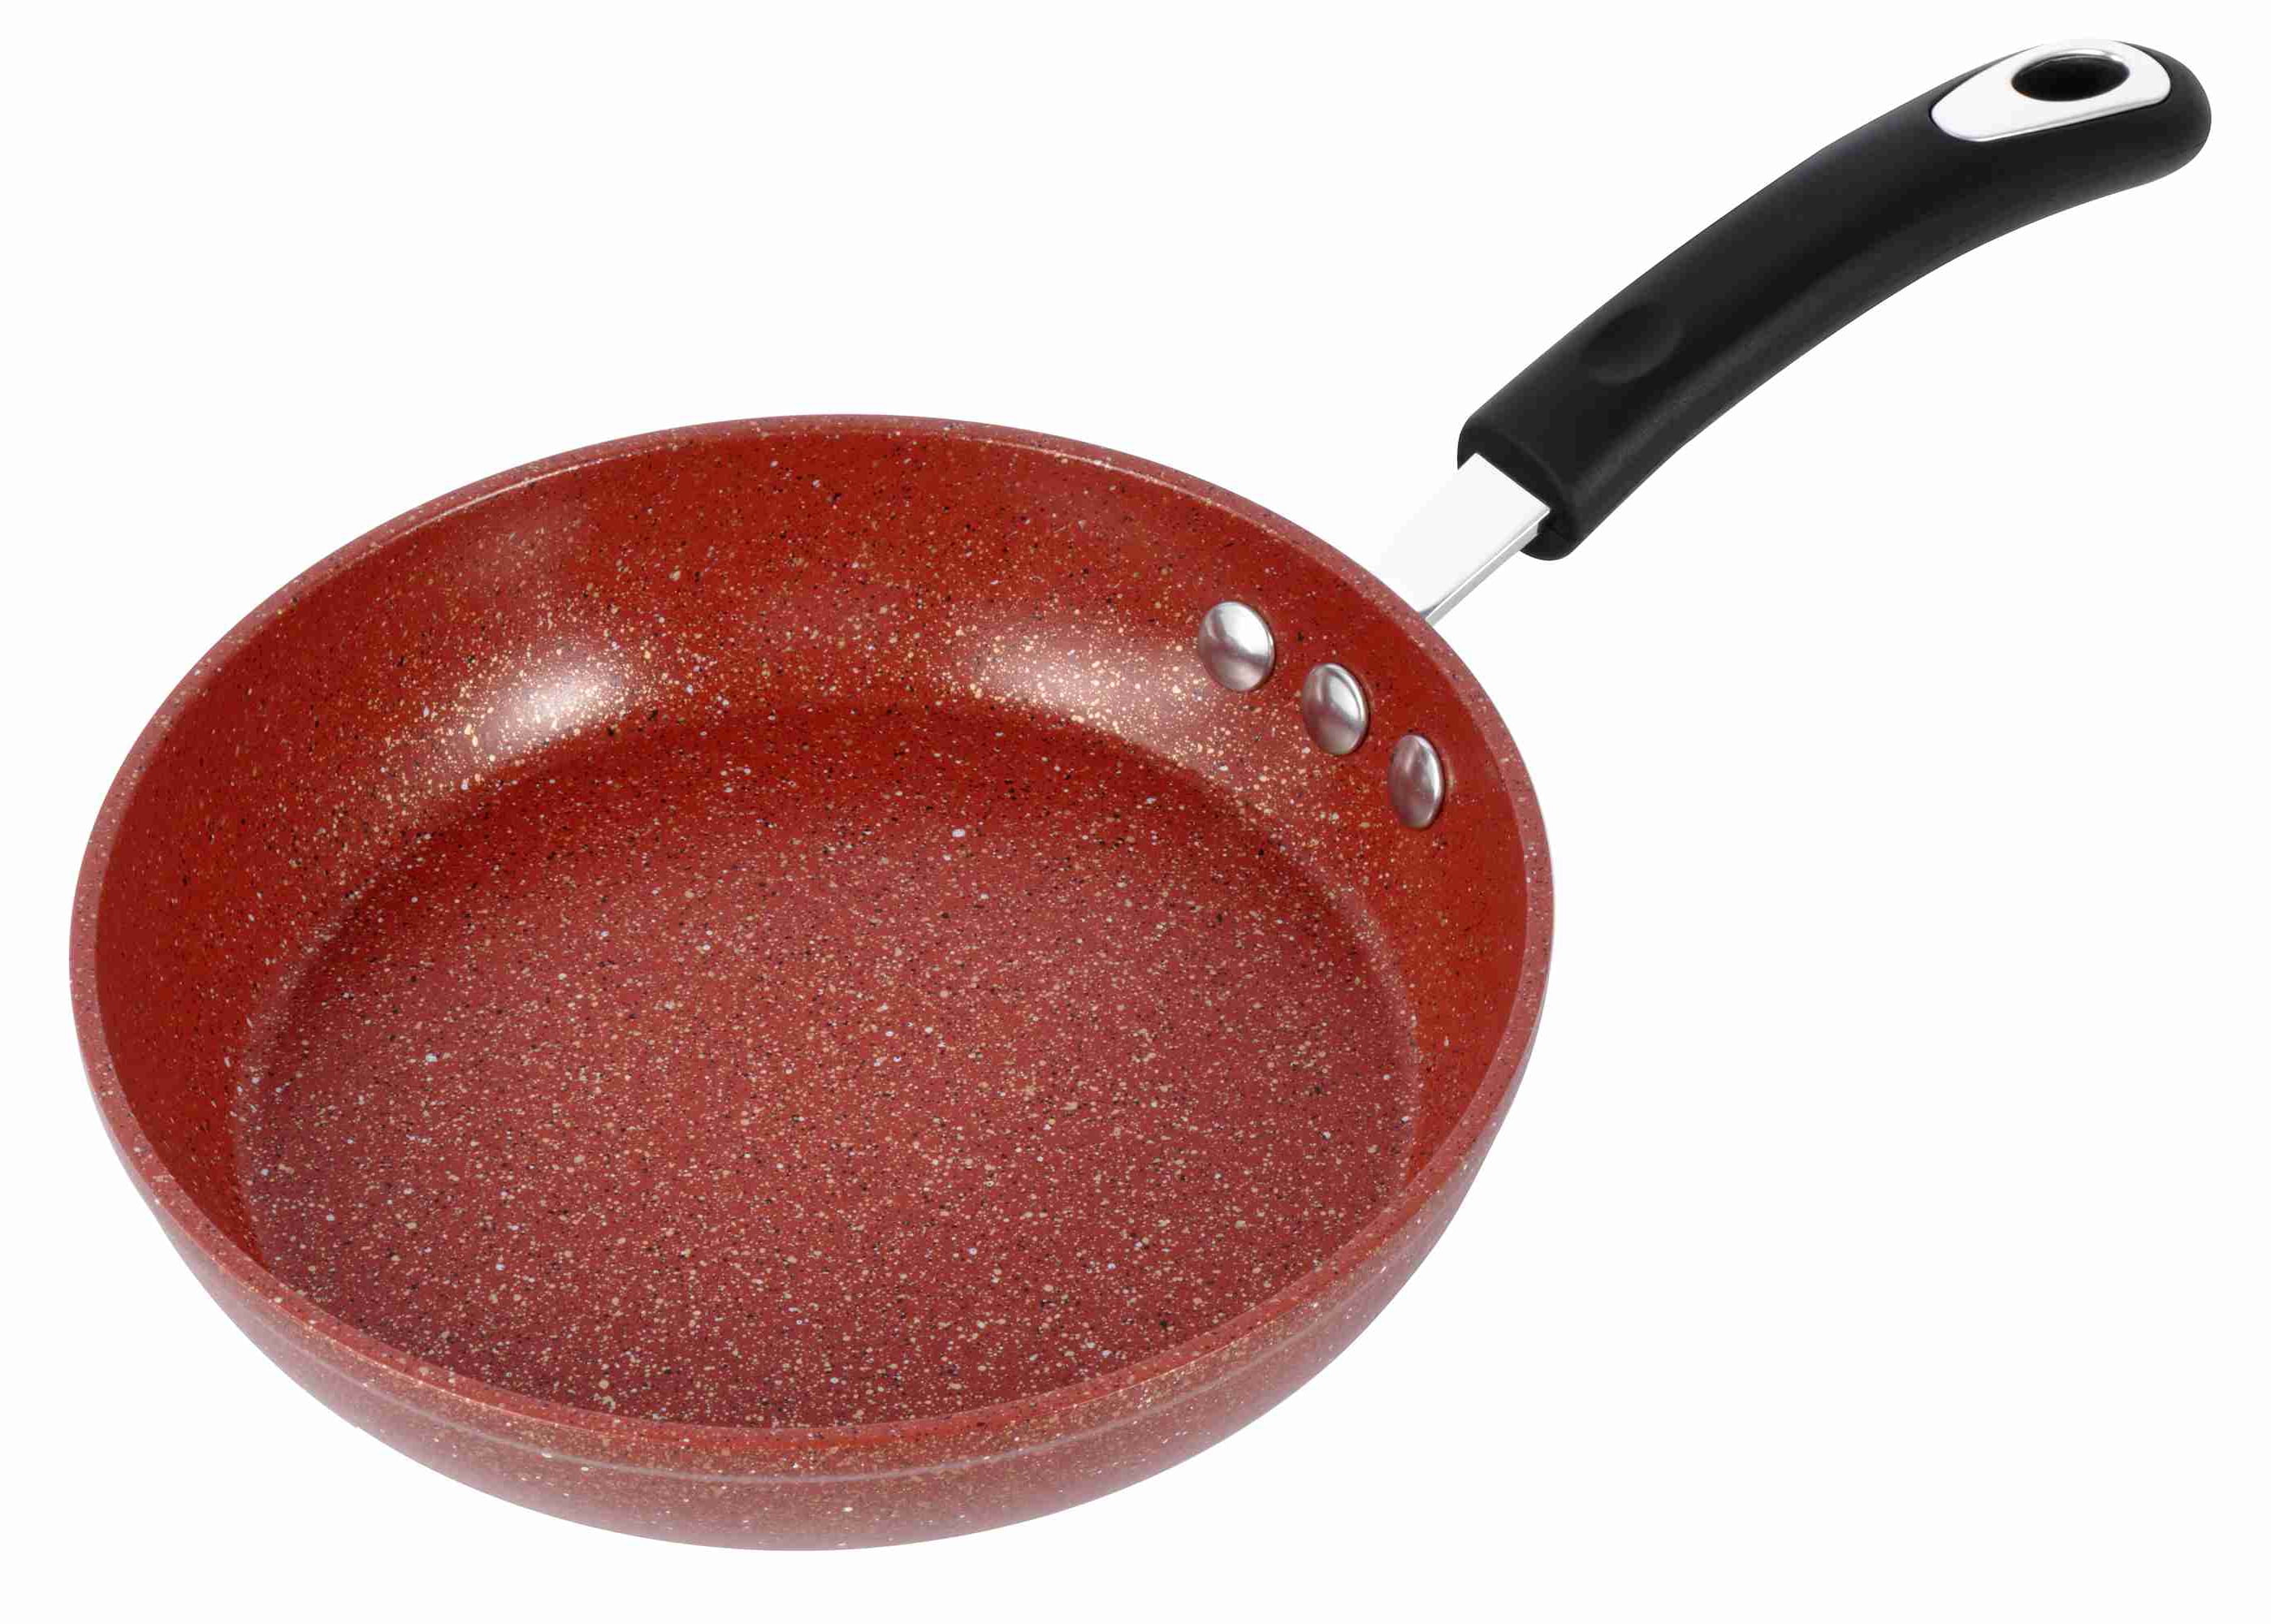 12 Stone Earth Fry Pan by Ozeri, with a 100% APEO & PFOA-Free Nonstick  Coating from Germany, 1 - Kroger